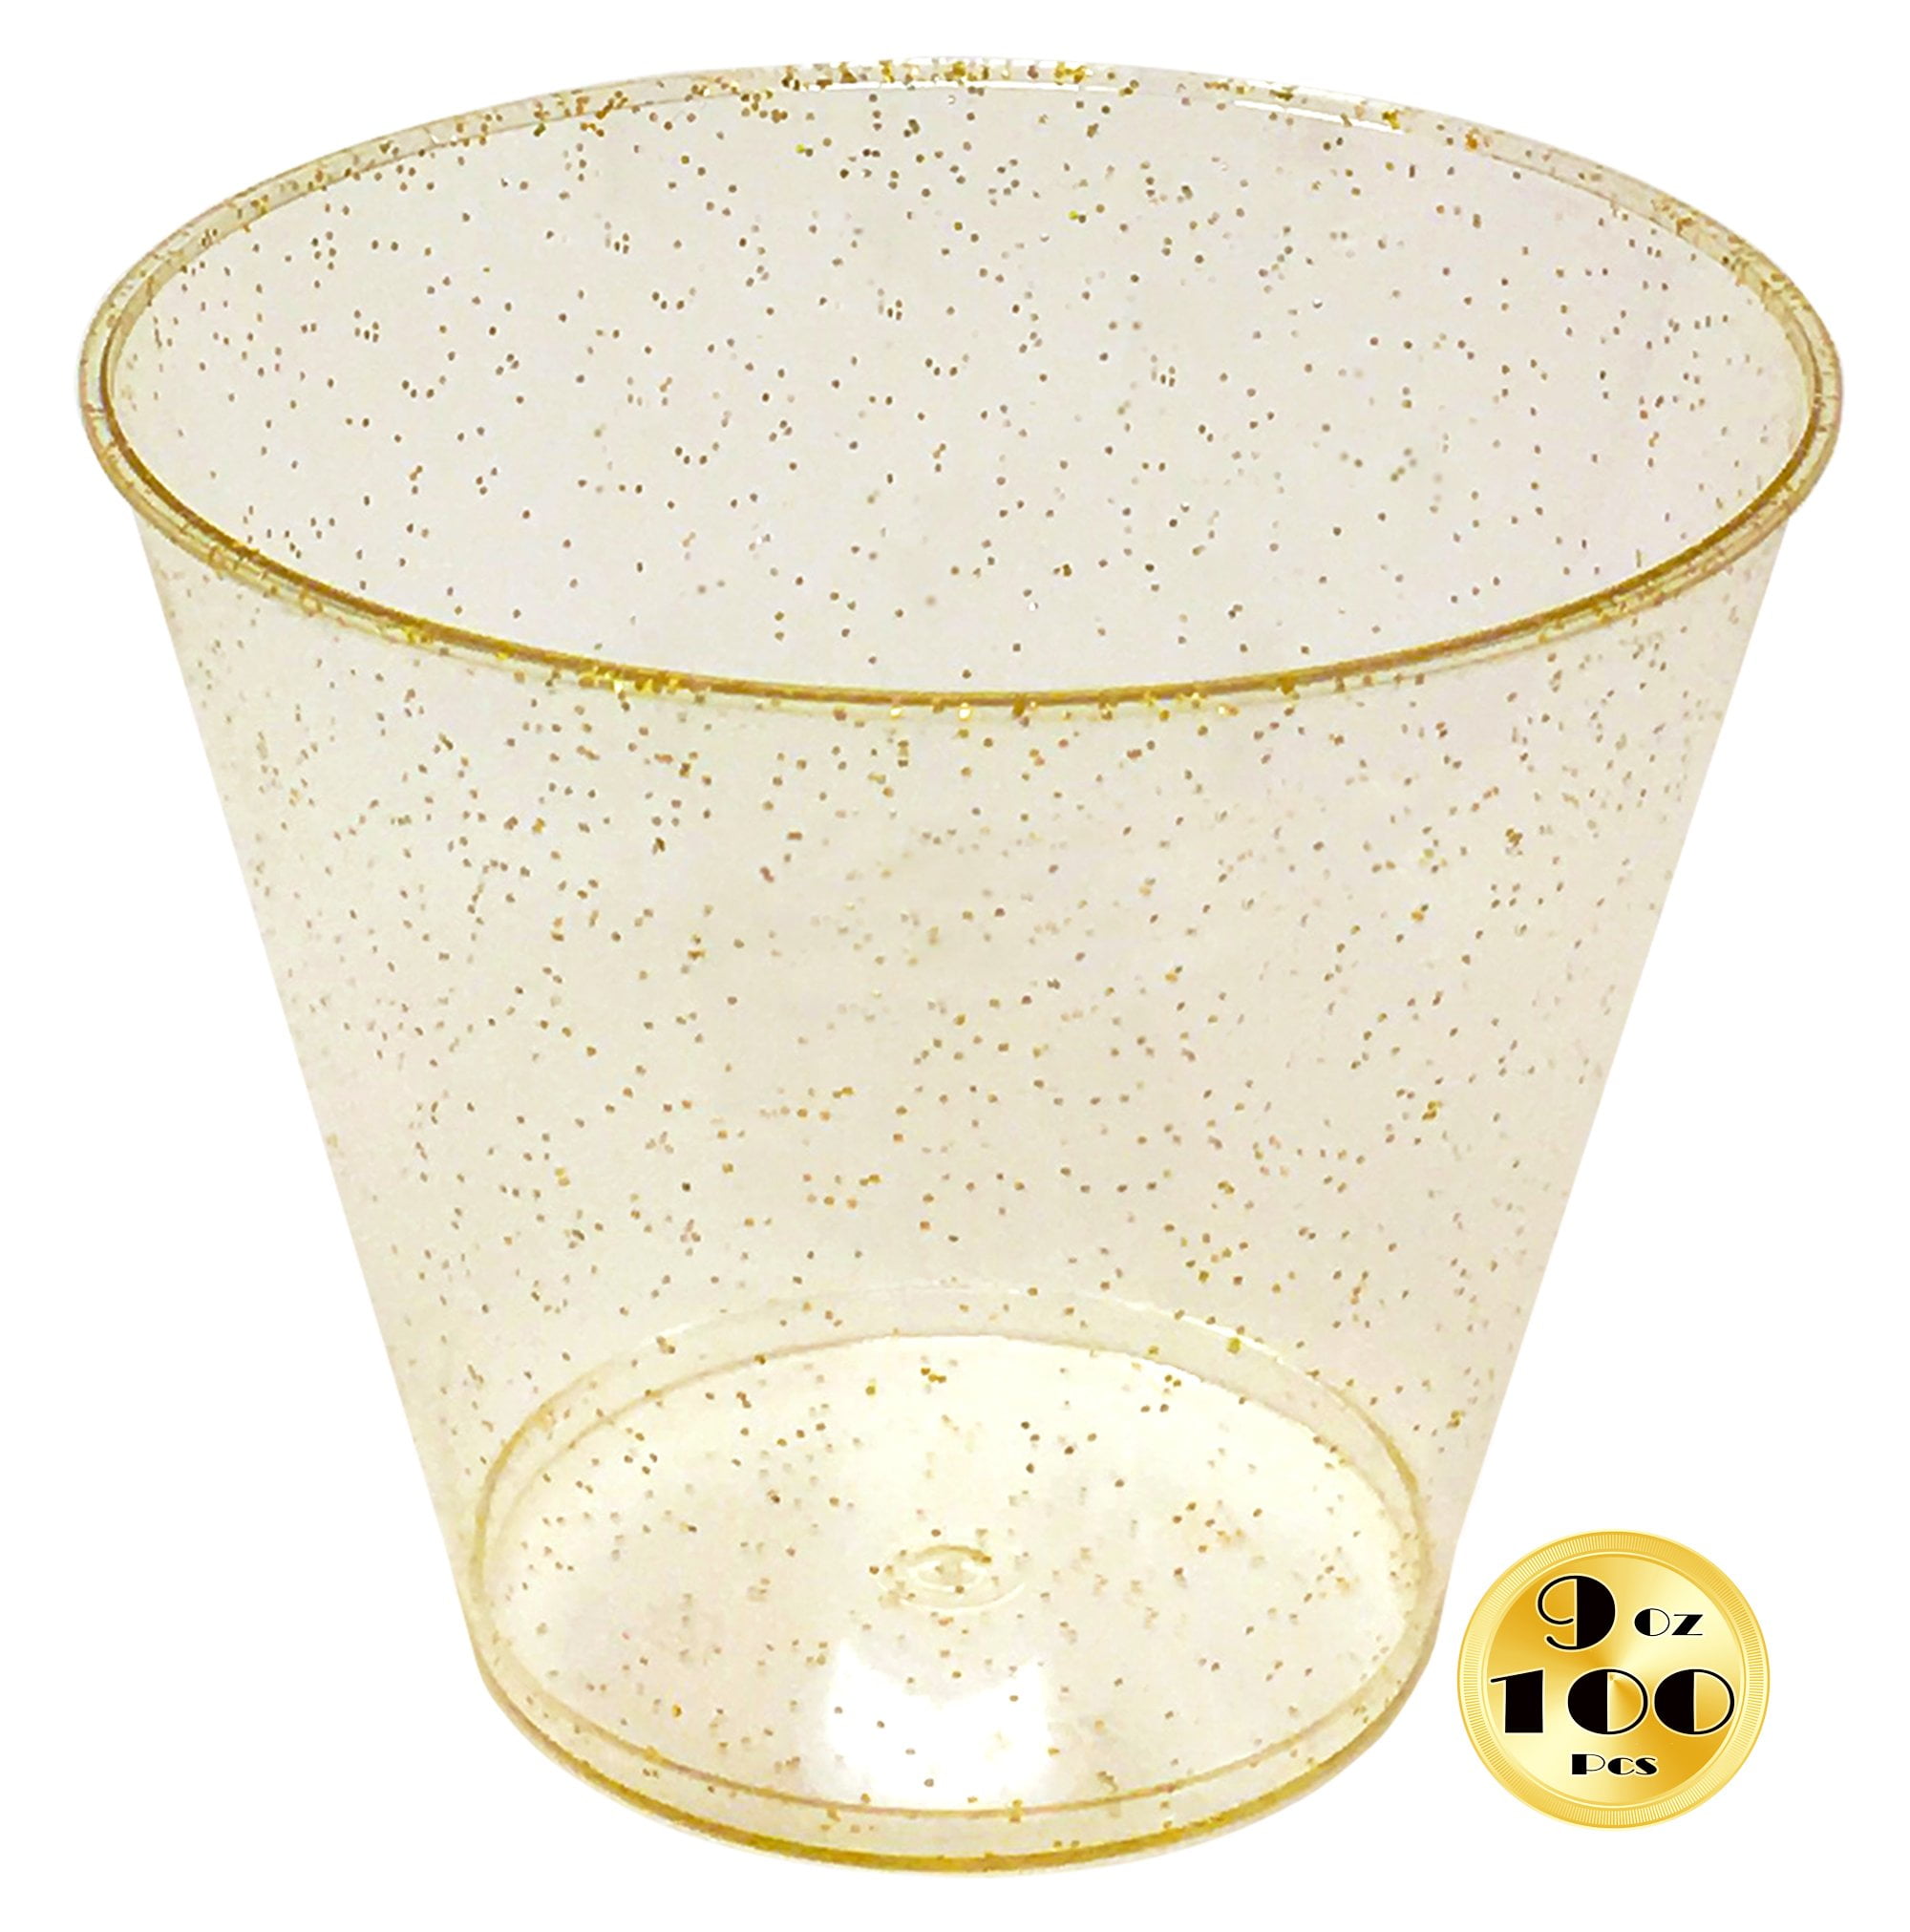 100 Pk 16 oz Hard Gold Glitter Disposable Plastic Cups Wedding, Party, Holiday, Celebration (Set of 100) Perfect Settings Tableware